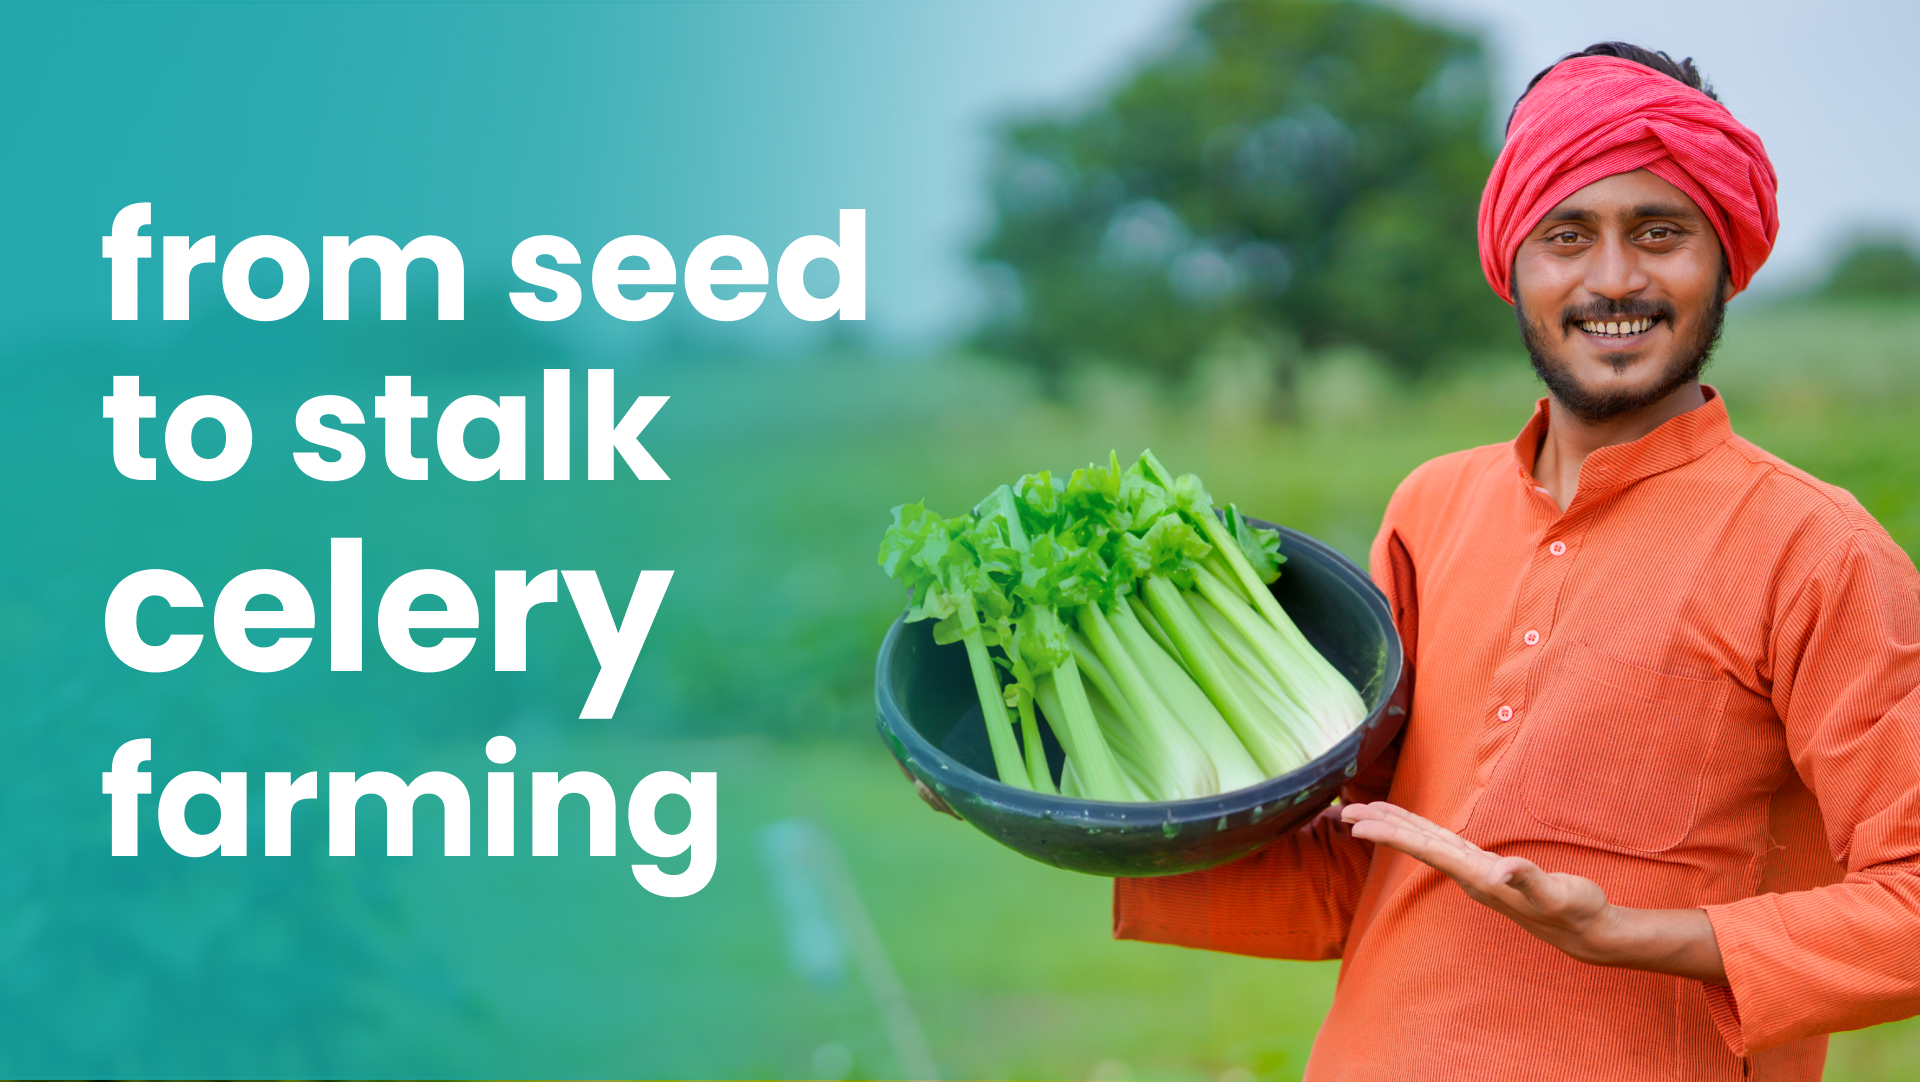 Course Trailer: Celery Farming: A Practical Guide to earn upto 18 Lakh/Yr from 1 Acre. Watch to know more.